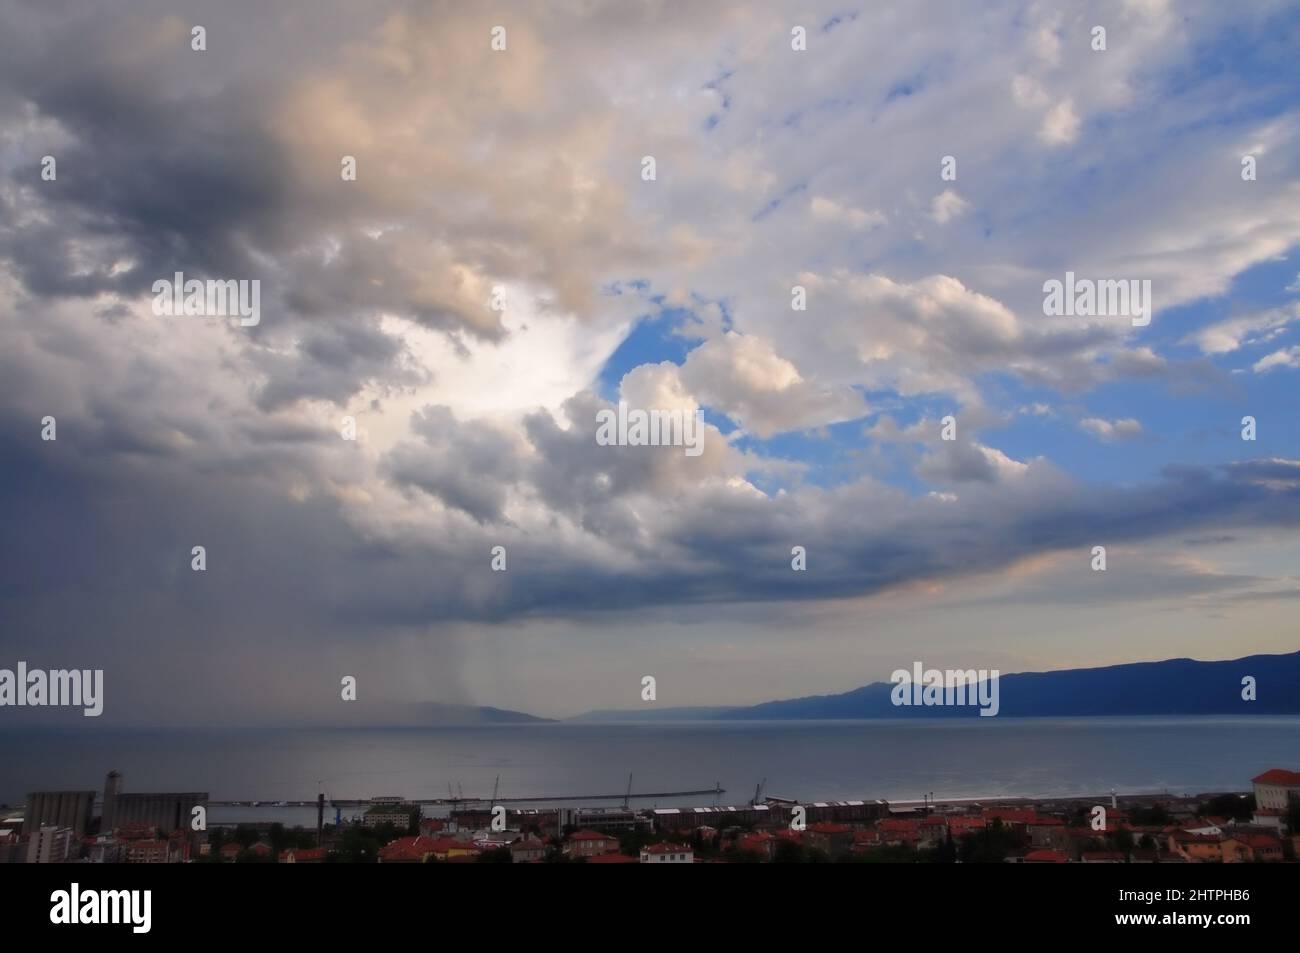 Stormy sky over sea and City. Rijeka bay and rain coming. Rain curtain over sea in Rijeka bay.Dramatic landscape of stormy sky over small seaside city Stock Photo